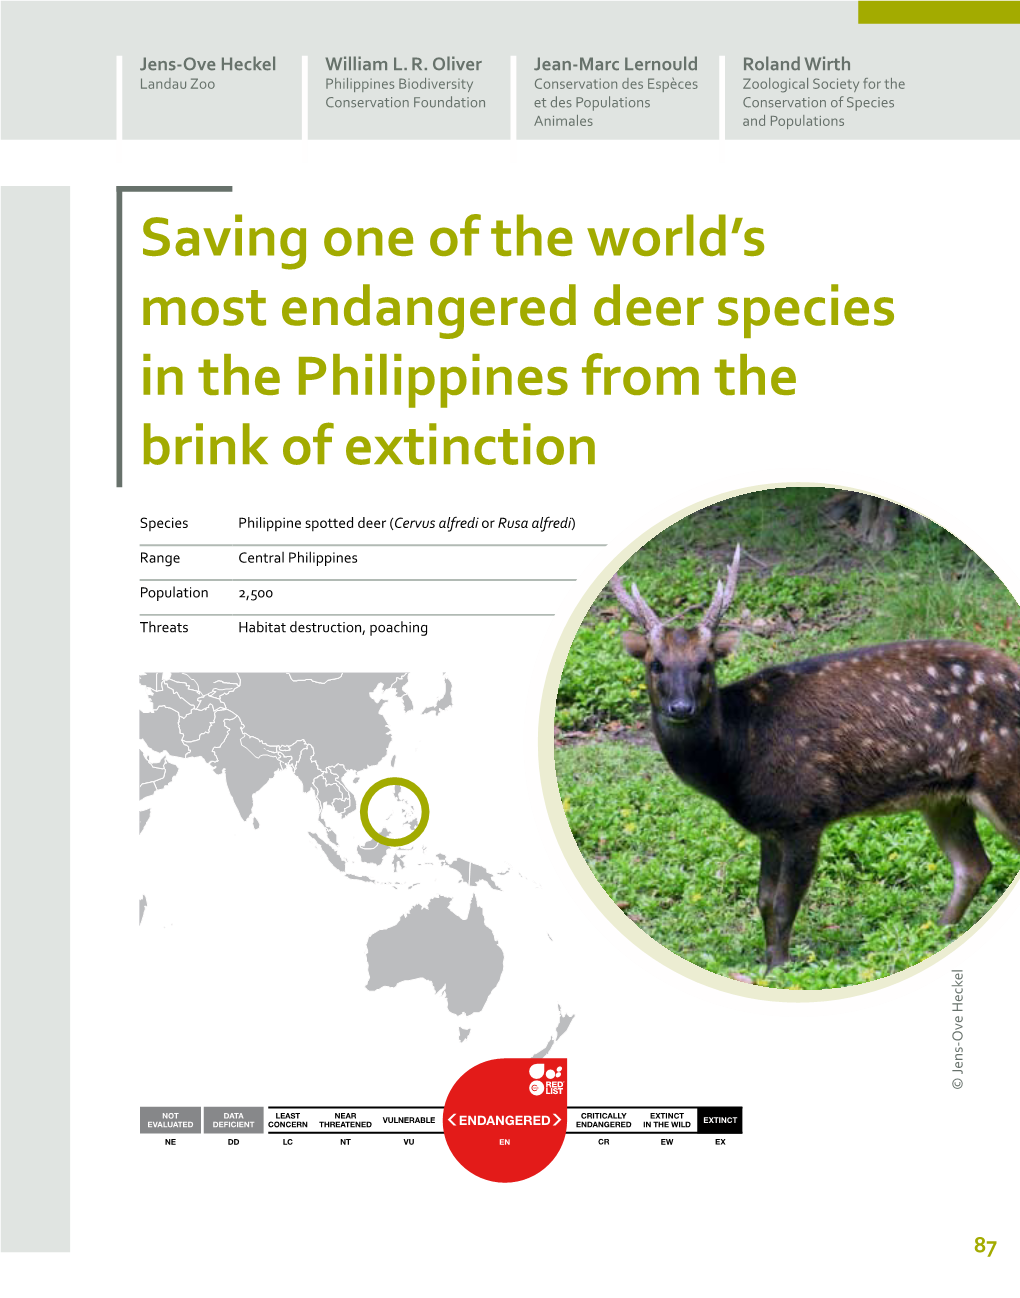 Saving One of the World's Most Endangered Deer Species in The